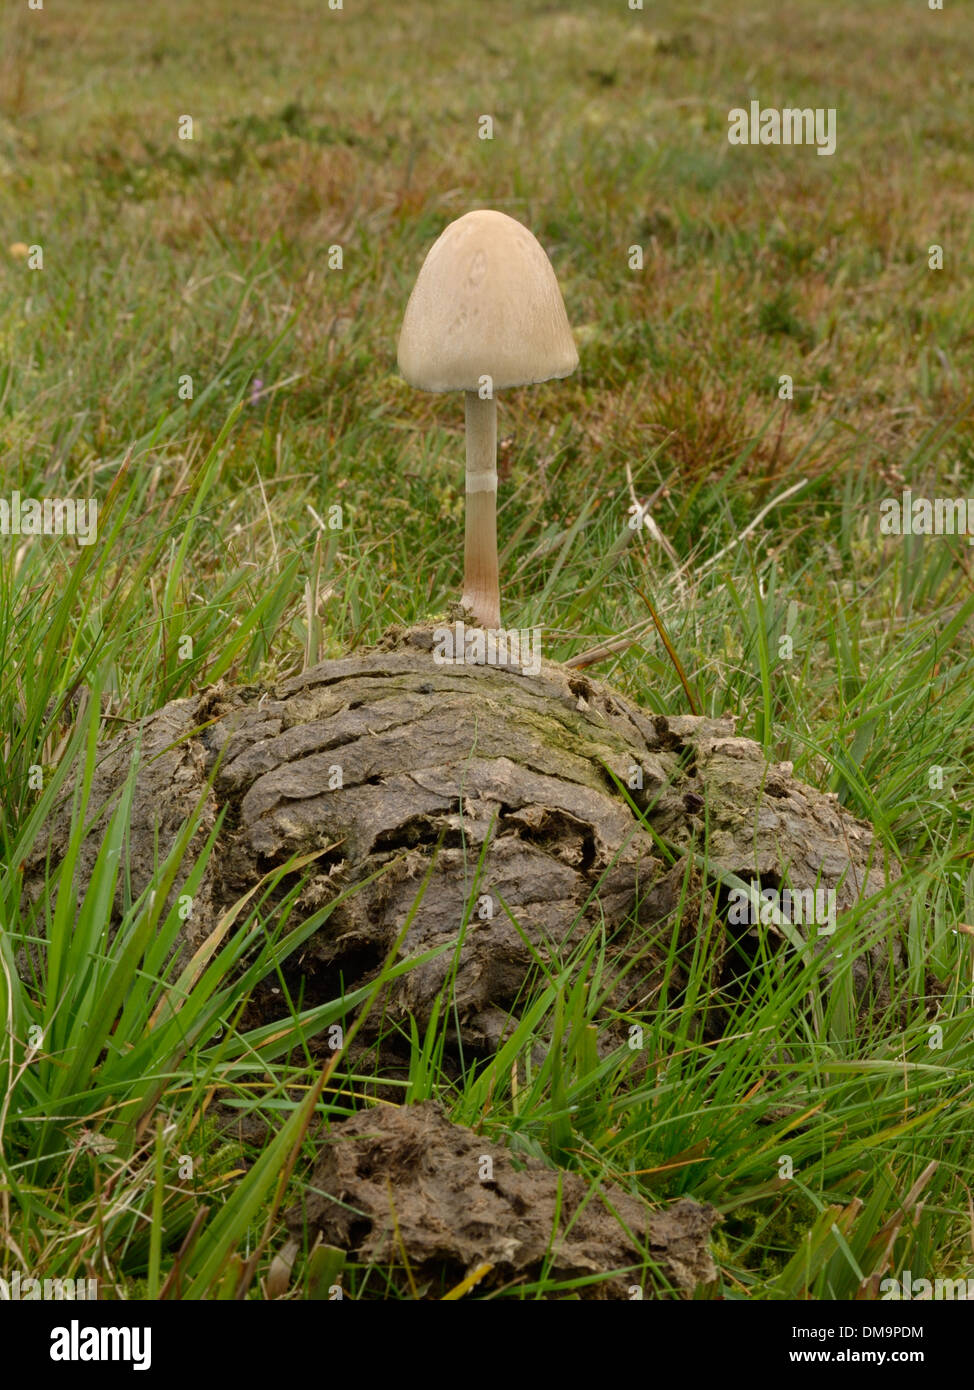 Coprophilous fungus growing on dung Stock Photo